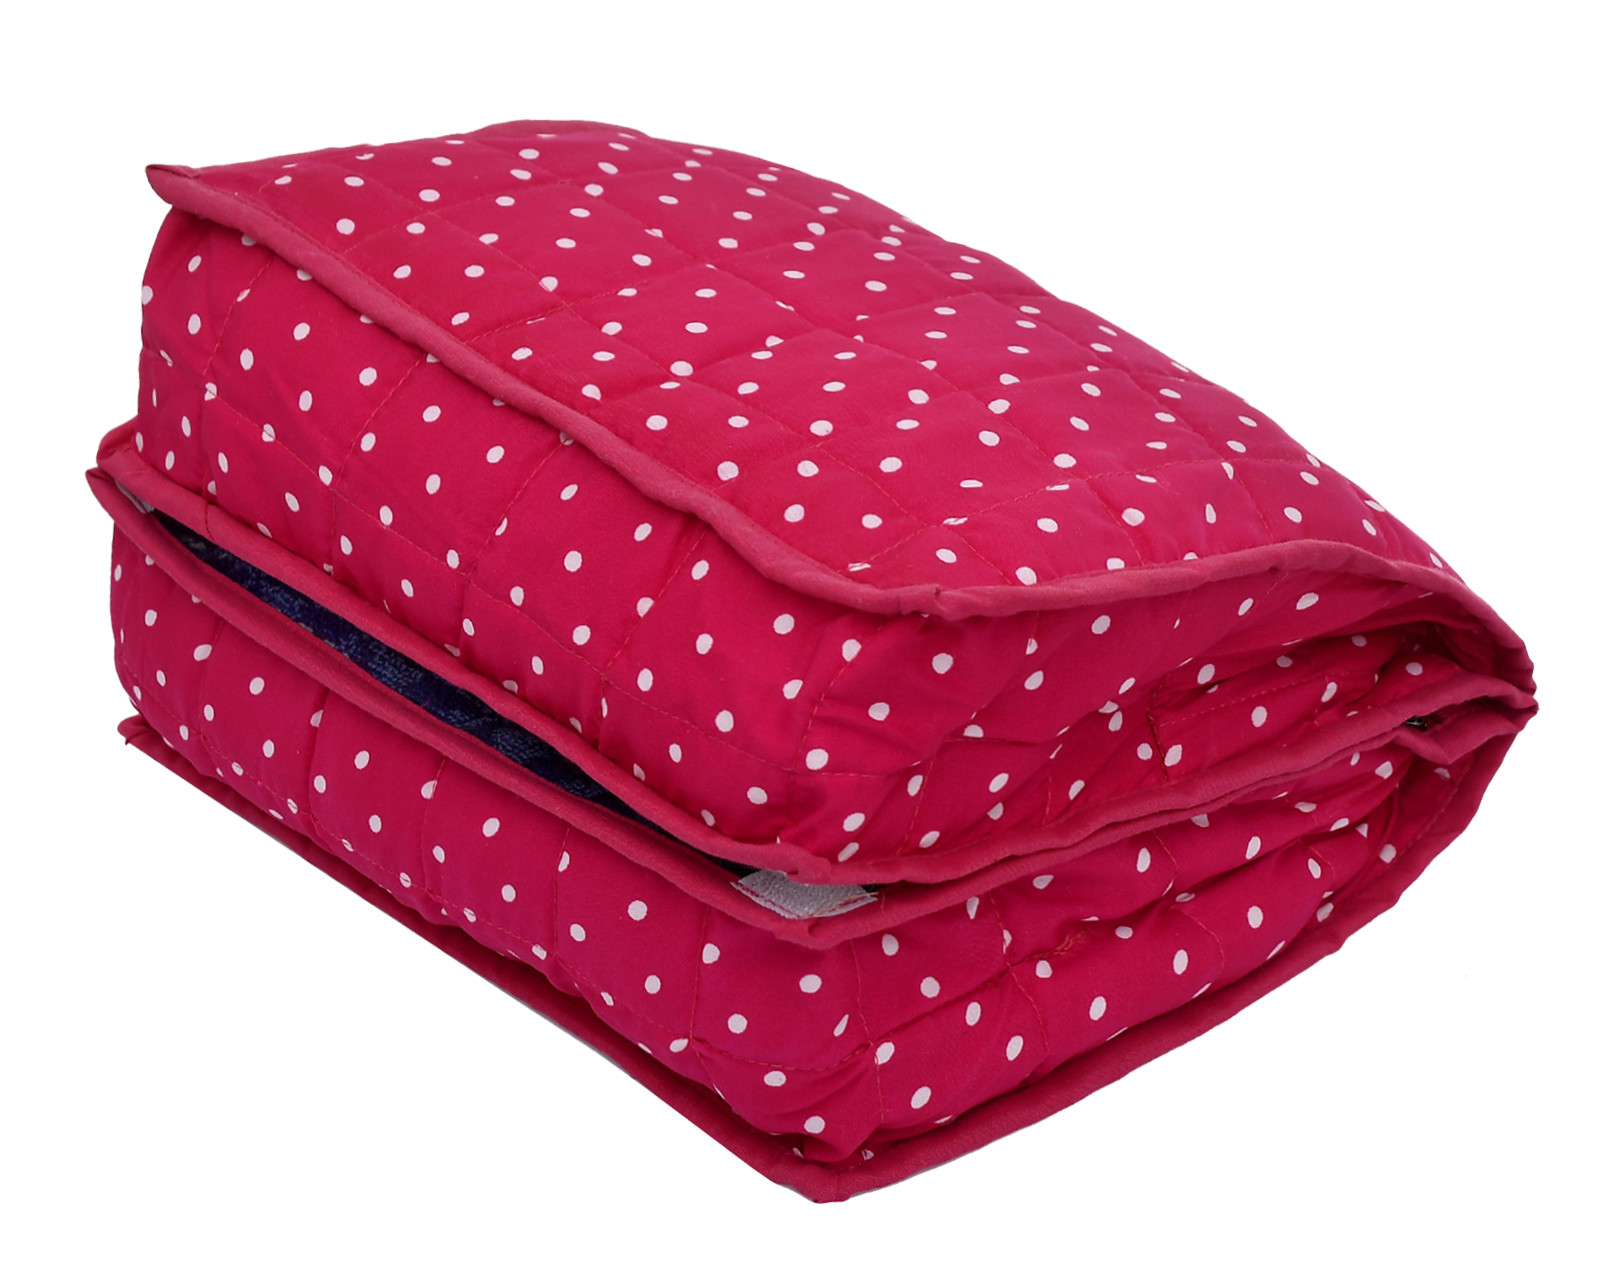 Kuber Industries Dot Printed Foldable Cotton Storage Bag/Garments Organizer With 2 Tranasparent Compartment (Pink) -45KM037